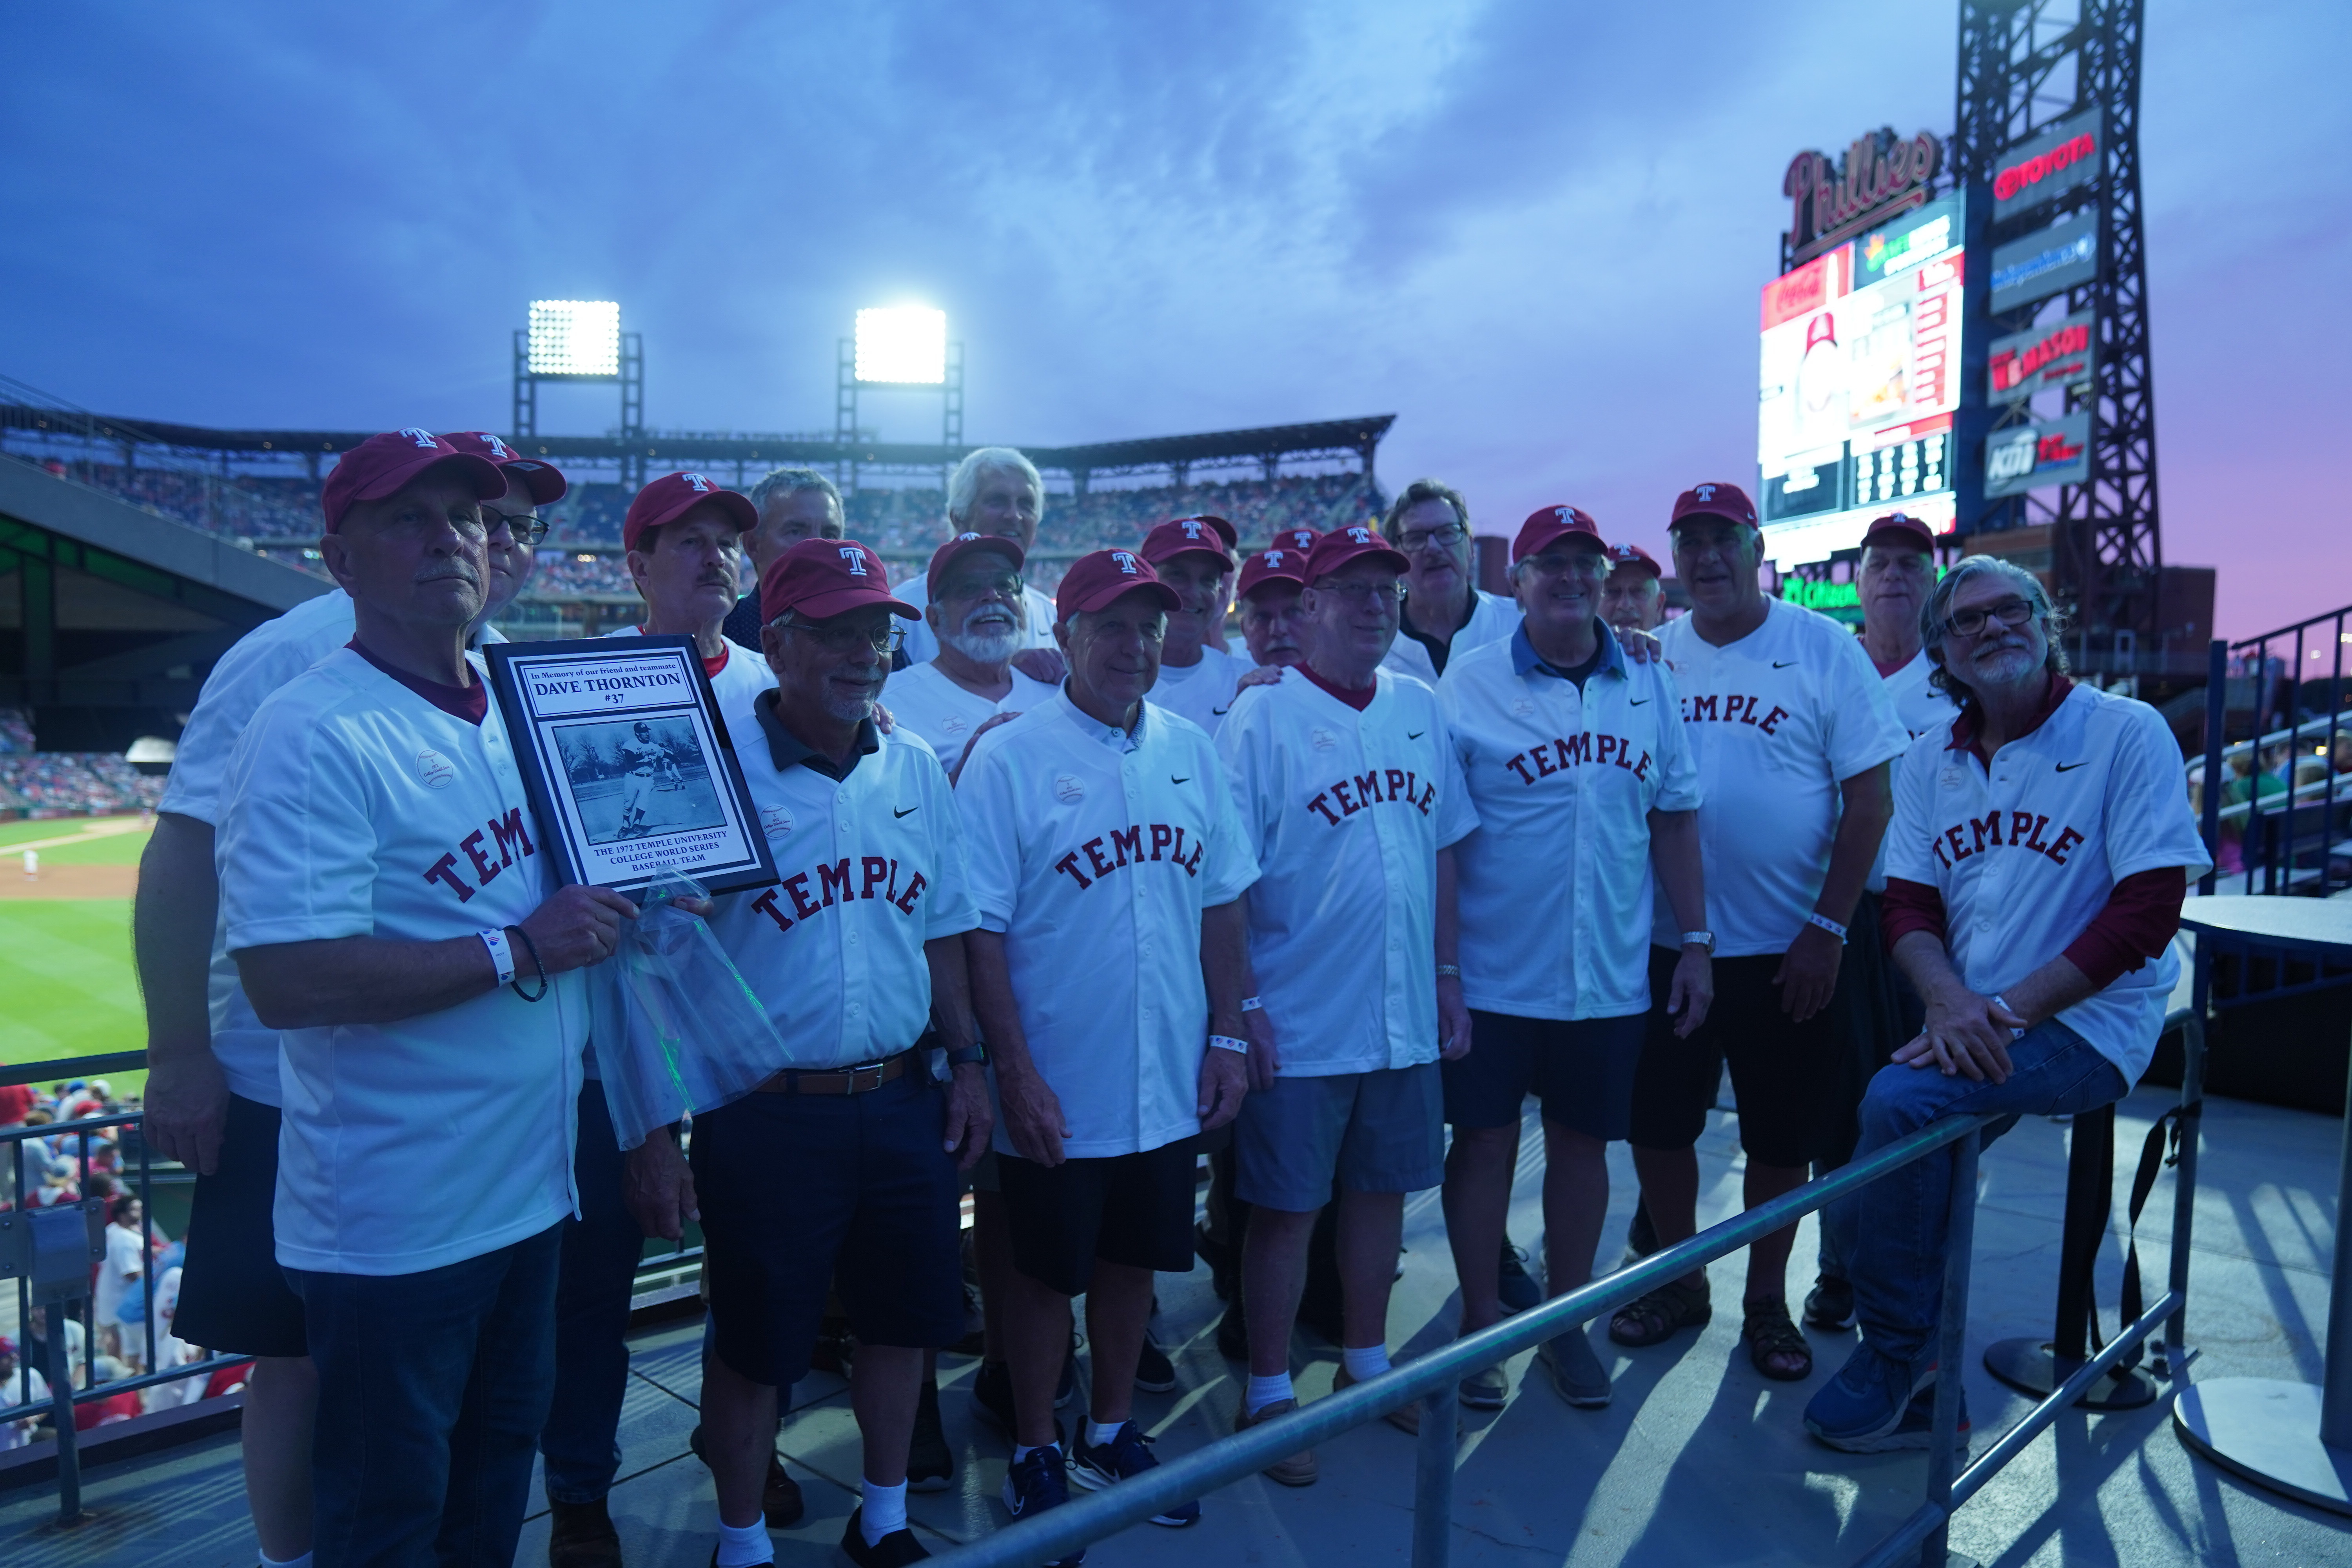 Temple baseball's 1972 College World Series team comes together at